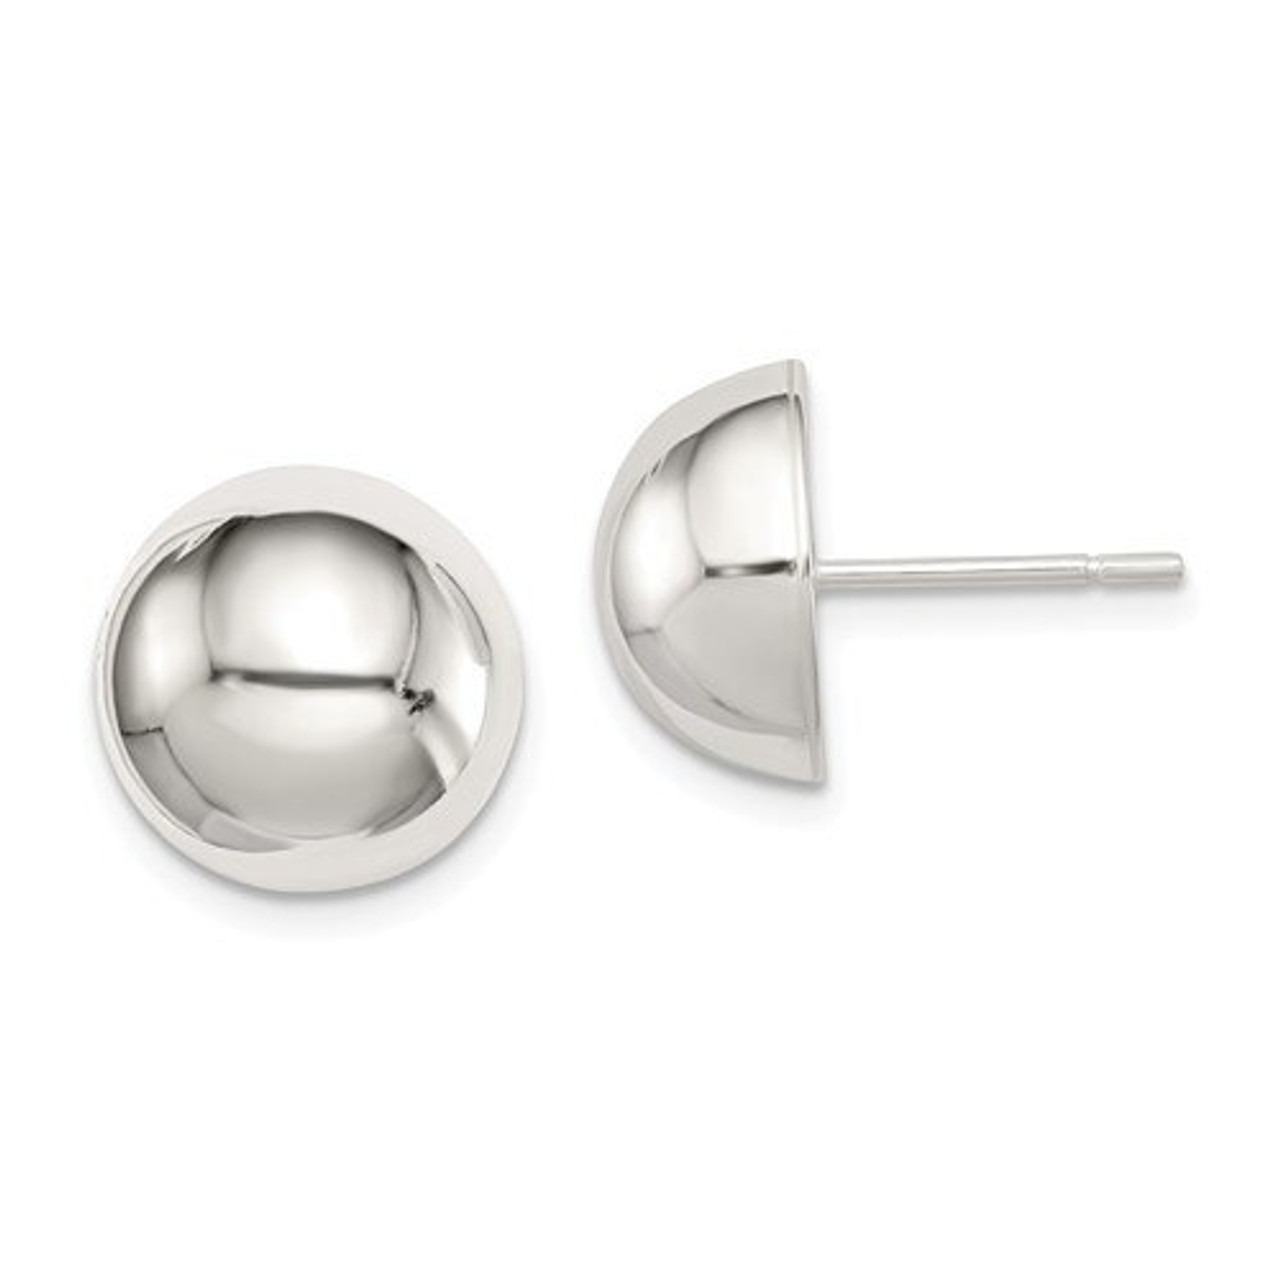 Discover 155+ 10mm sterling silver ball earrings super hot